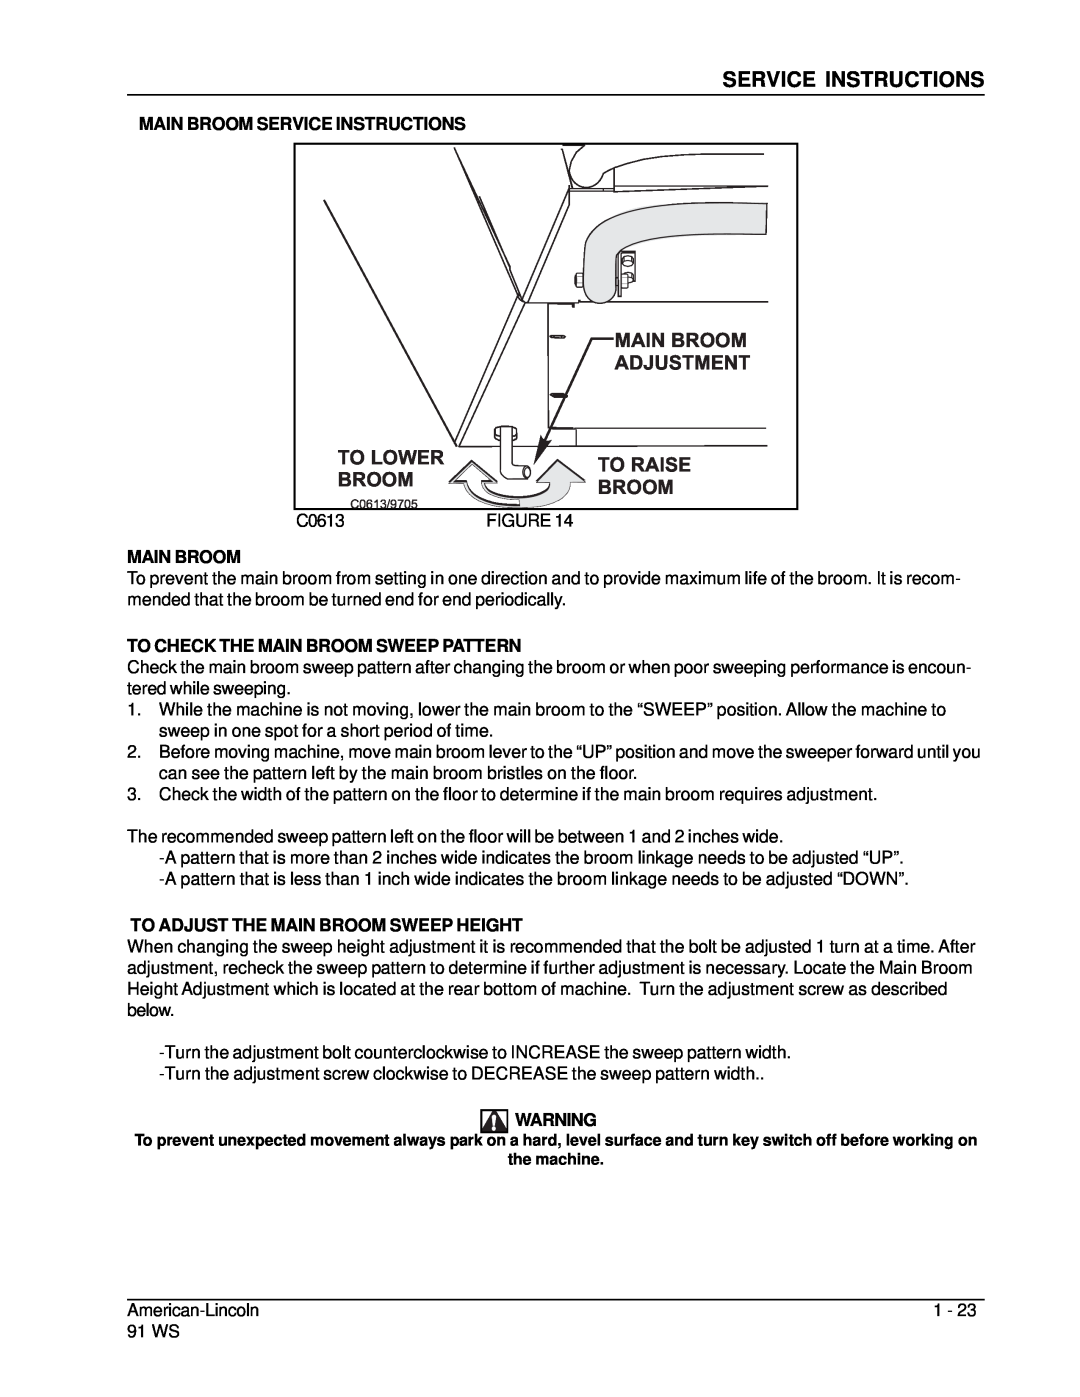 Nilfisk-ALTO 91WS manual Adjustment, To Lower, To Raise, Main Broom Service Instructions, C0613 